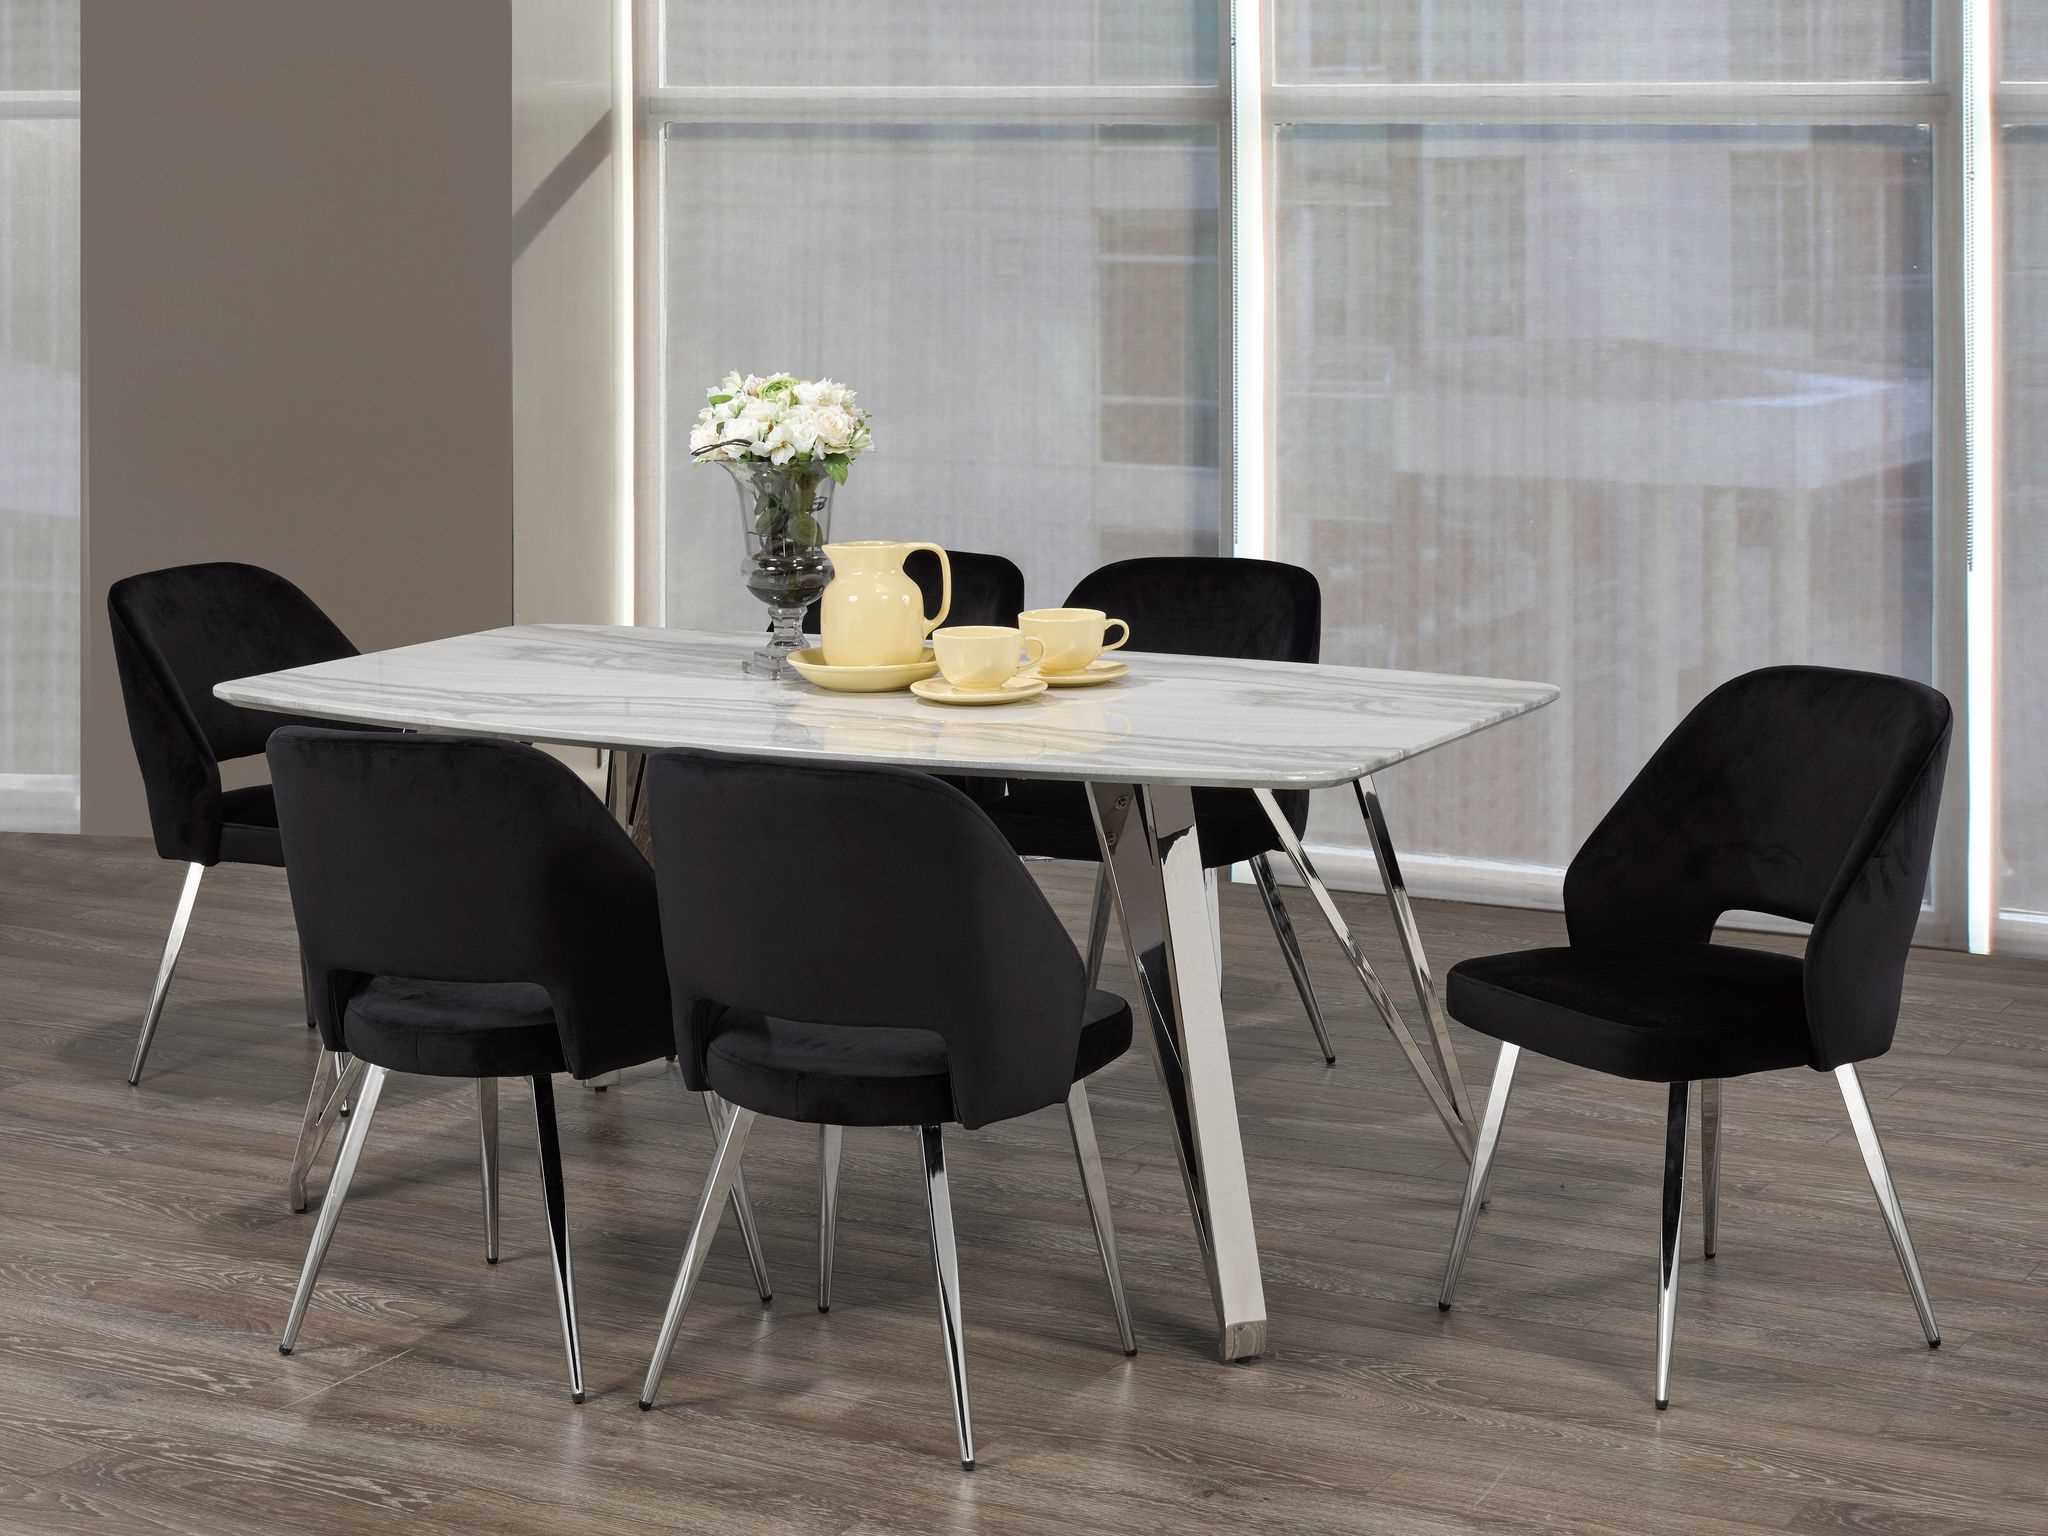 Ella Dining Table with 6 Black Chairs 1194